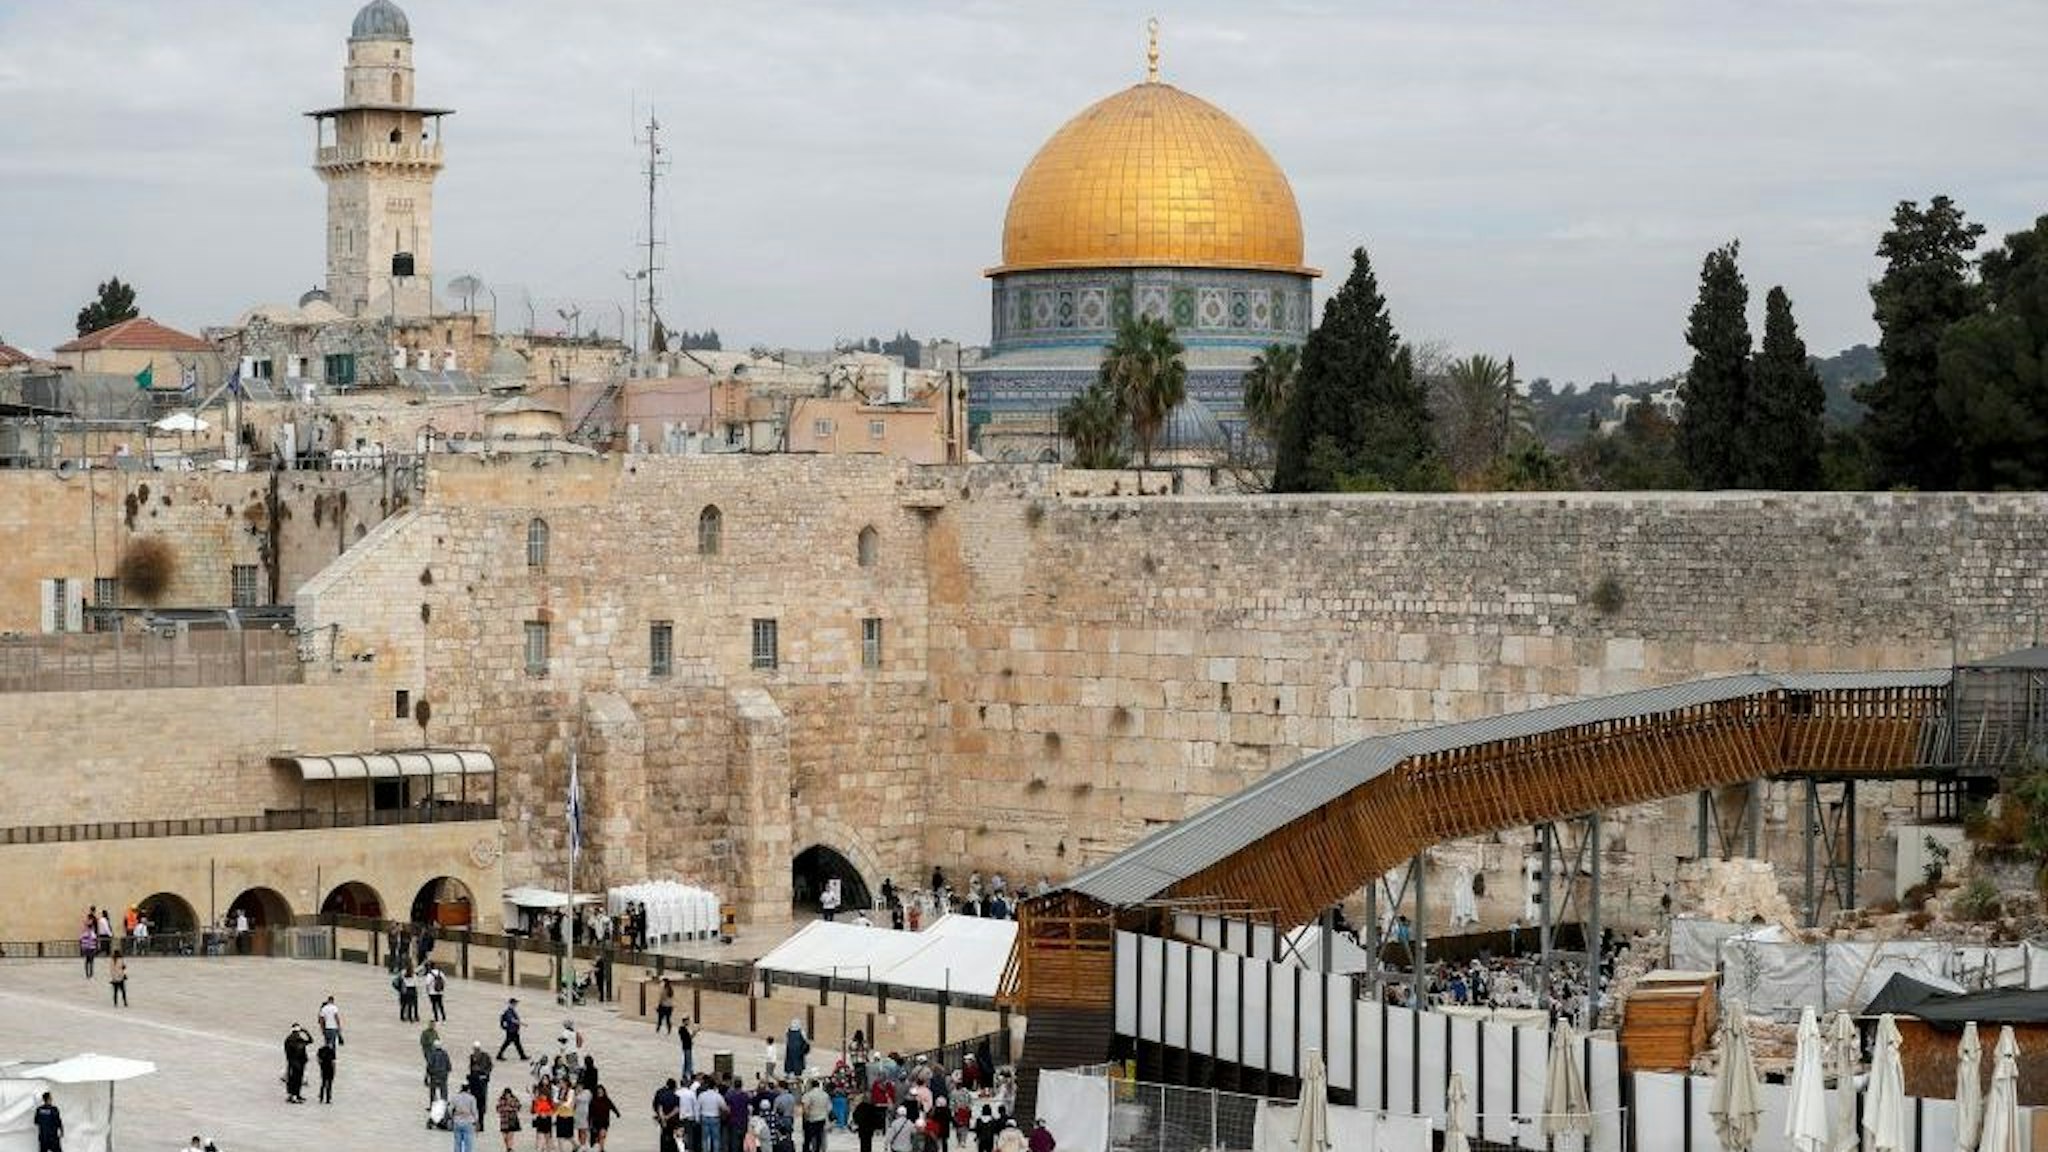 This picture shows the Mughrabi ramp, leading from the Western Wall (Wailing Wall) to the Al-Aqsa Mosque compound that includes the Dome of the Rock Mosque (background) in Jerusalem's Old City, on November 17, 2021. (Photo by AHMAD GHARABLI / AFP) (Photo by AHMAD GHARABLI/AFP via Getty Images)